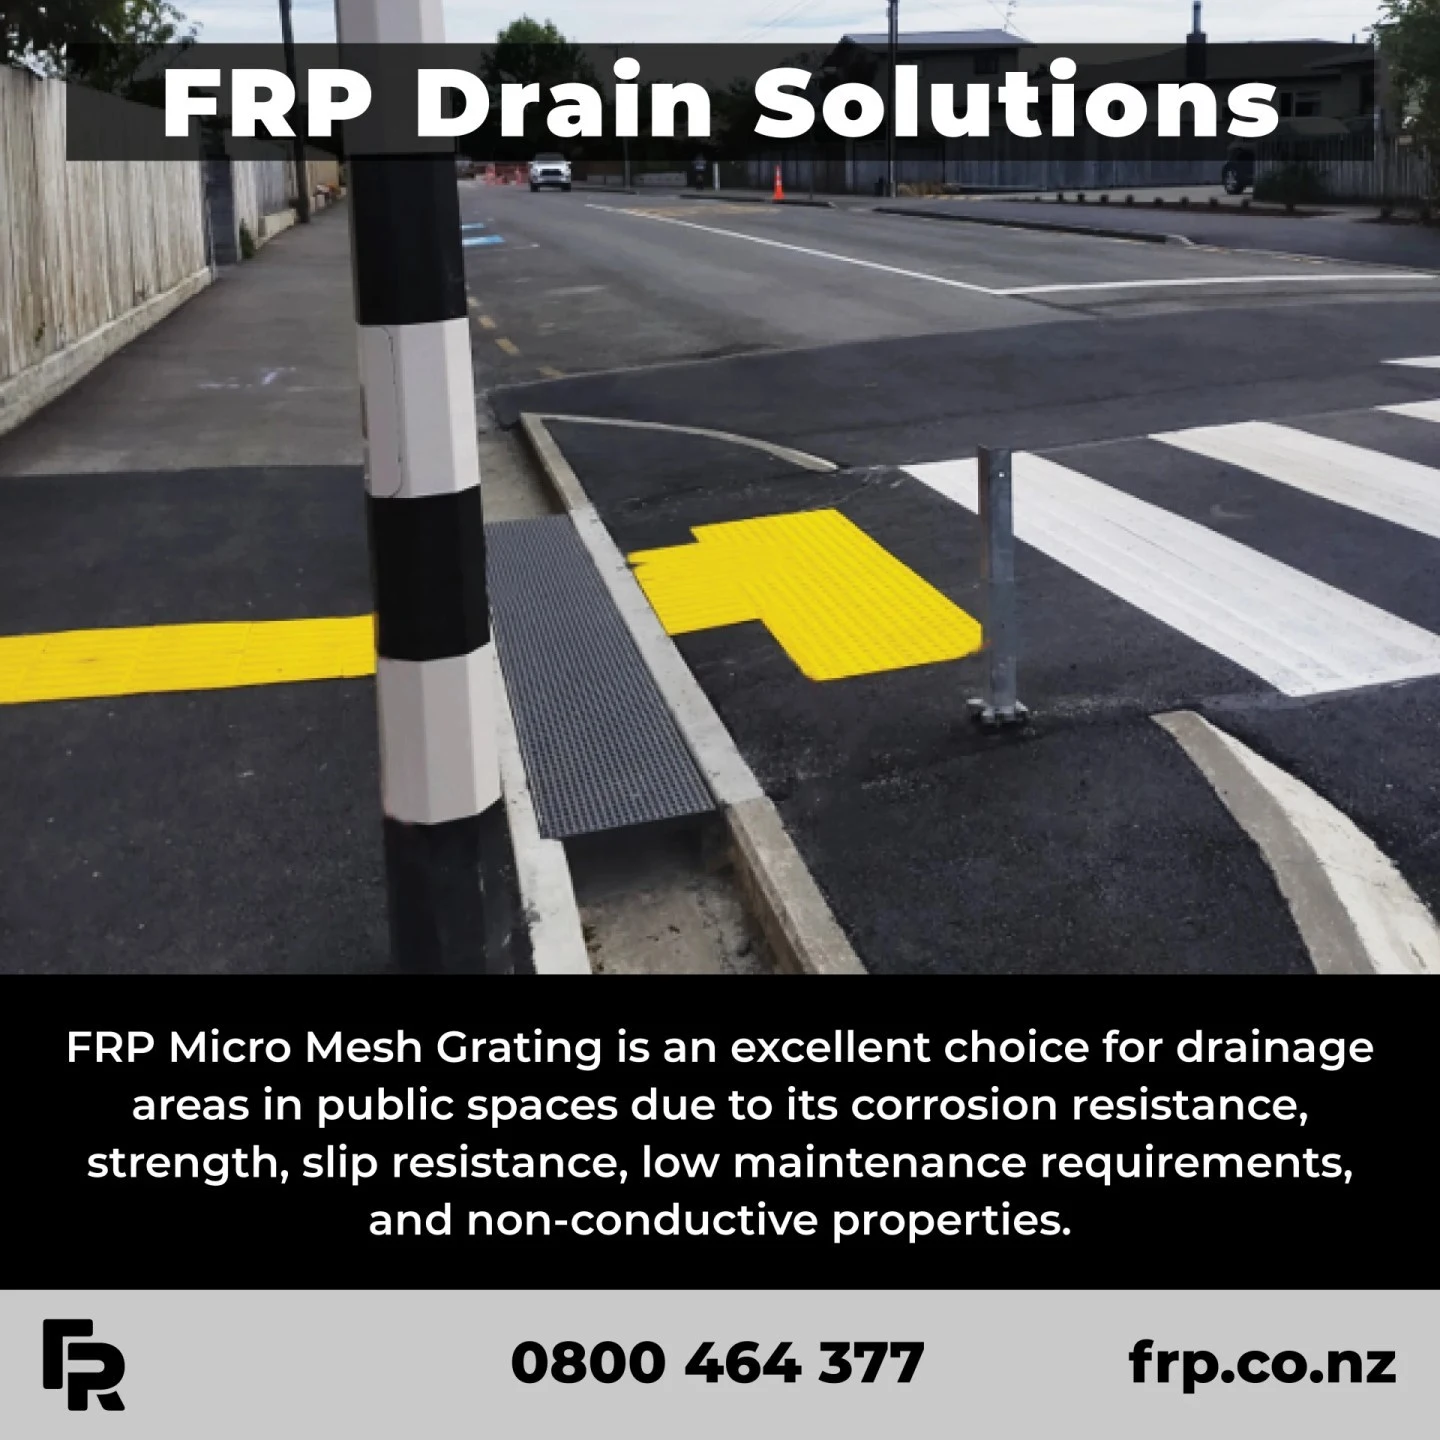 Give us a call today.

#frp #frpgrating #drain #nzconstruction #civil #publicspaces #footpaths #safety #engineers #engineering #commercial #nzcouncils